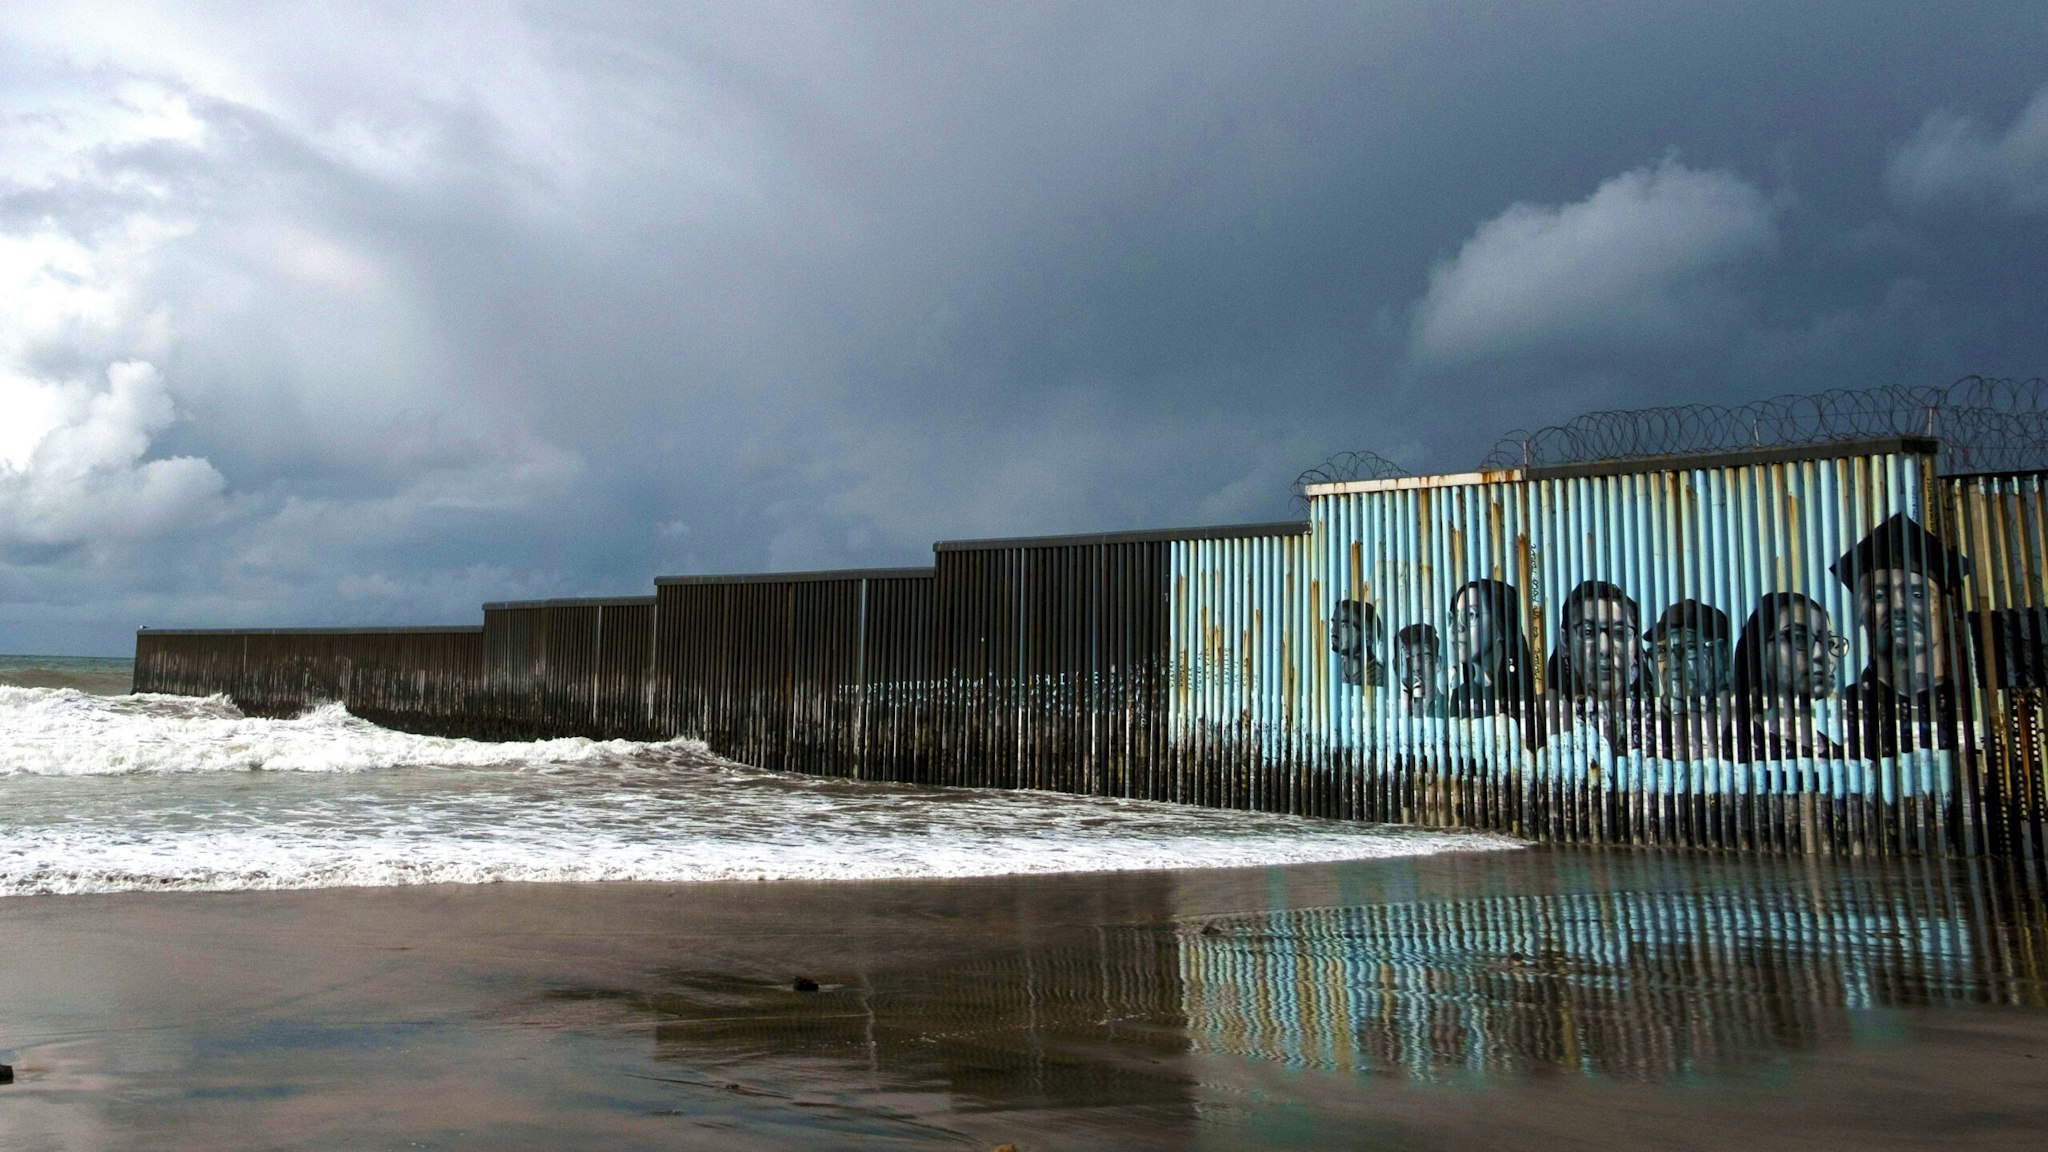 TOPSHOT - Waves crash on the US-Mexico border fence as winter storm clouds are seen over Playas de Tijuana, Baja California state, Mexico, on January 29, 2021. - A winter storm is expected to hit northwestern Mexico.